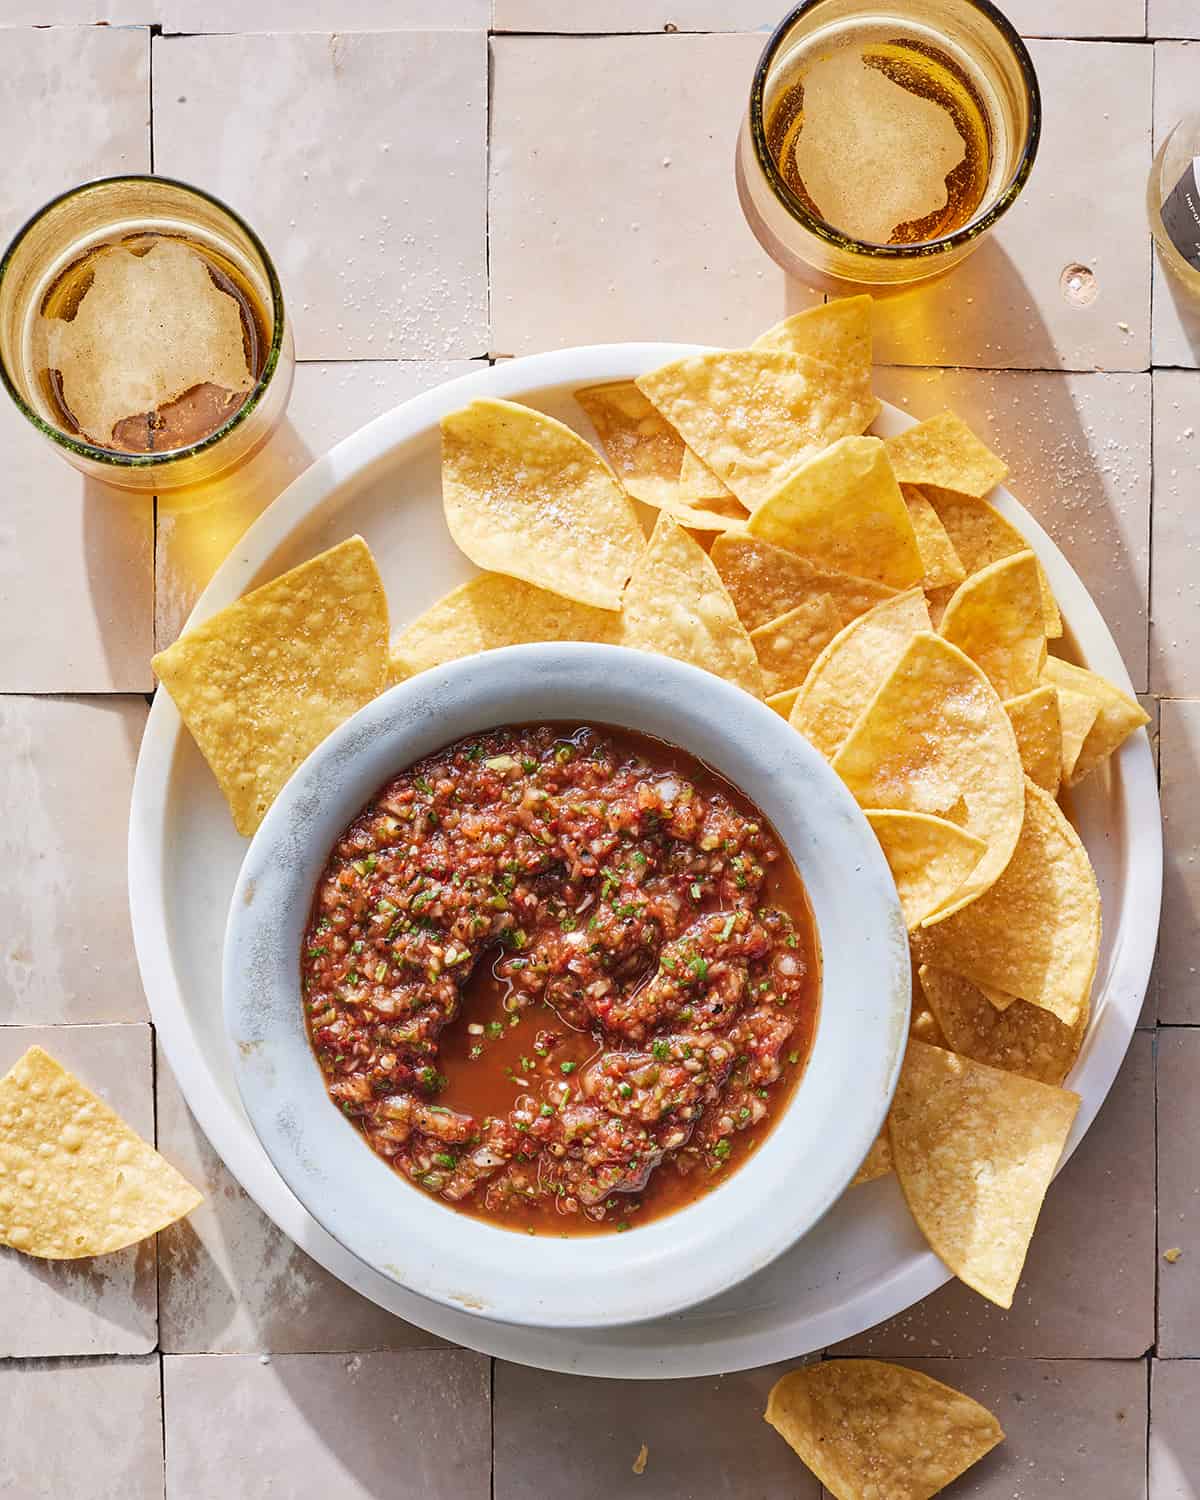 A bowl of red salsa sitting on a plate next to some tortilla chips and pints of beer.  